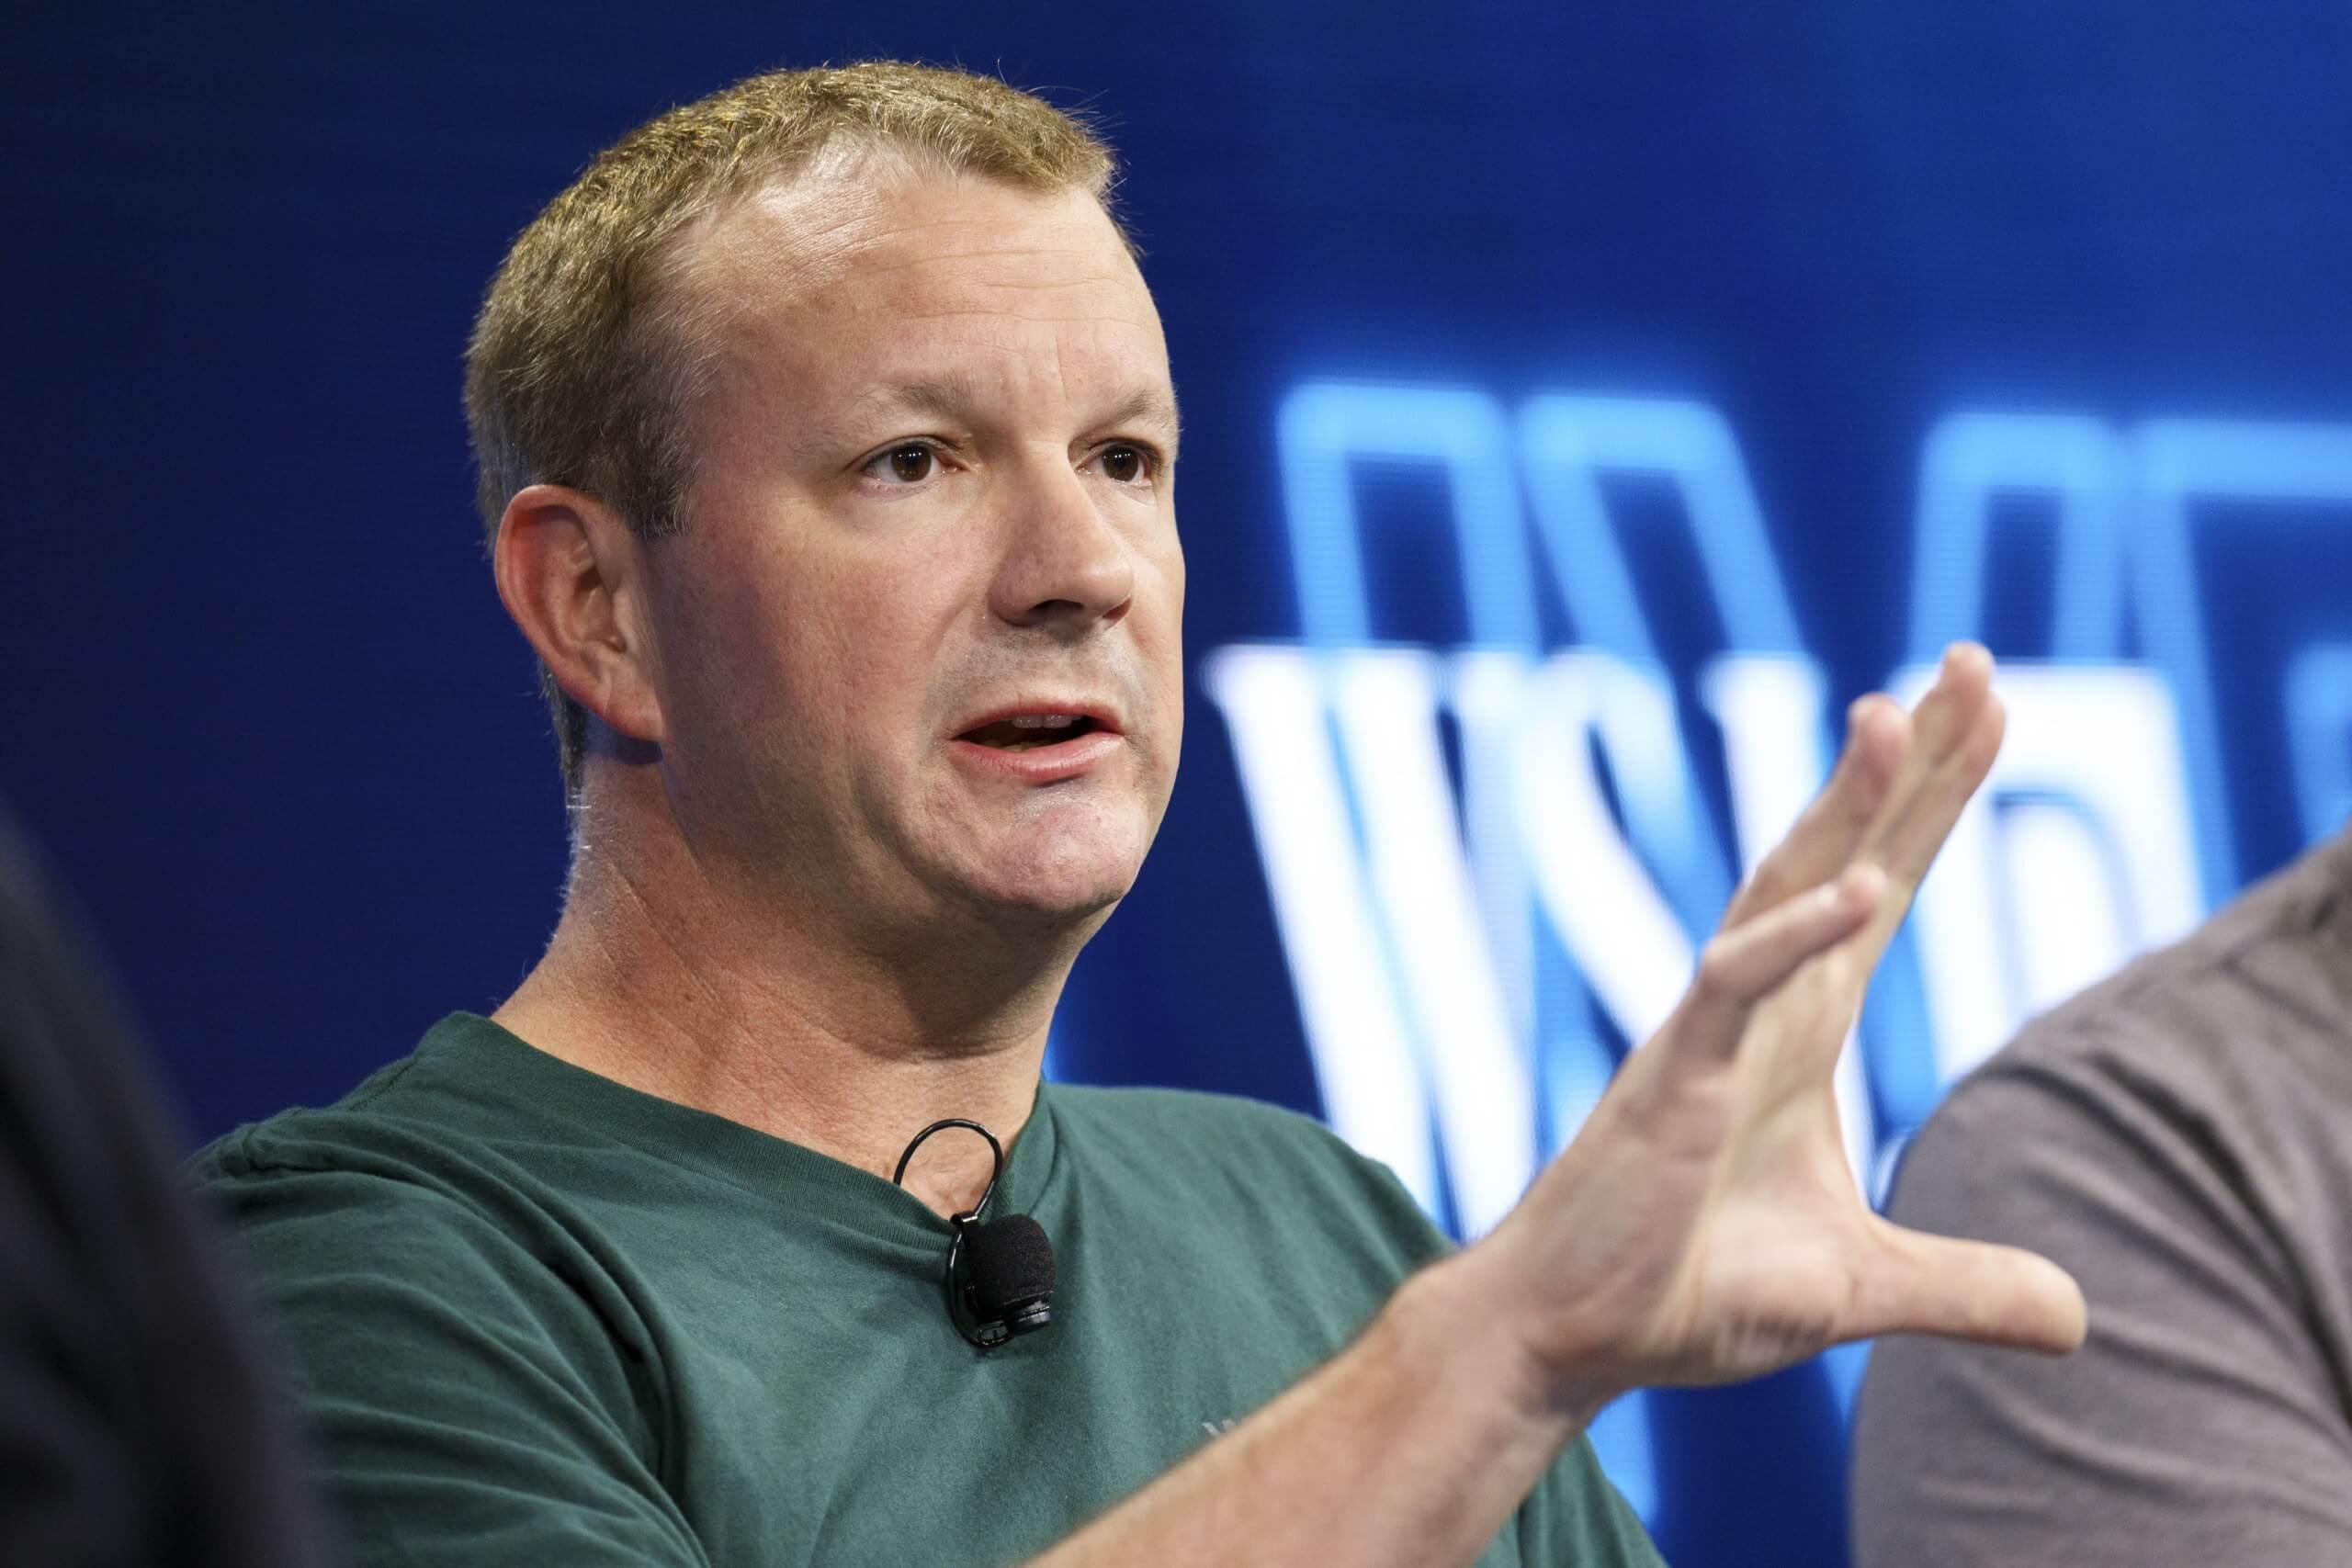 WhatsApp co-founder shows remorse for selling out his users' privacy